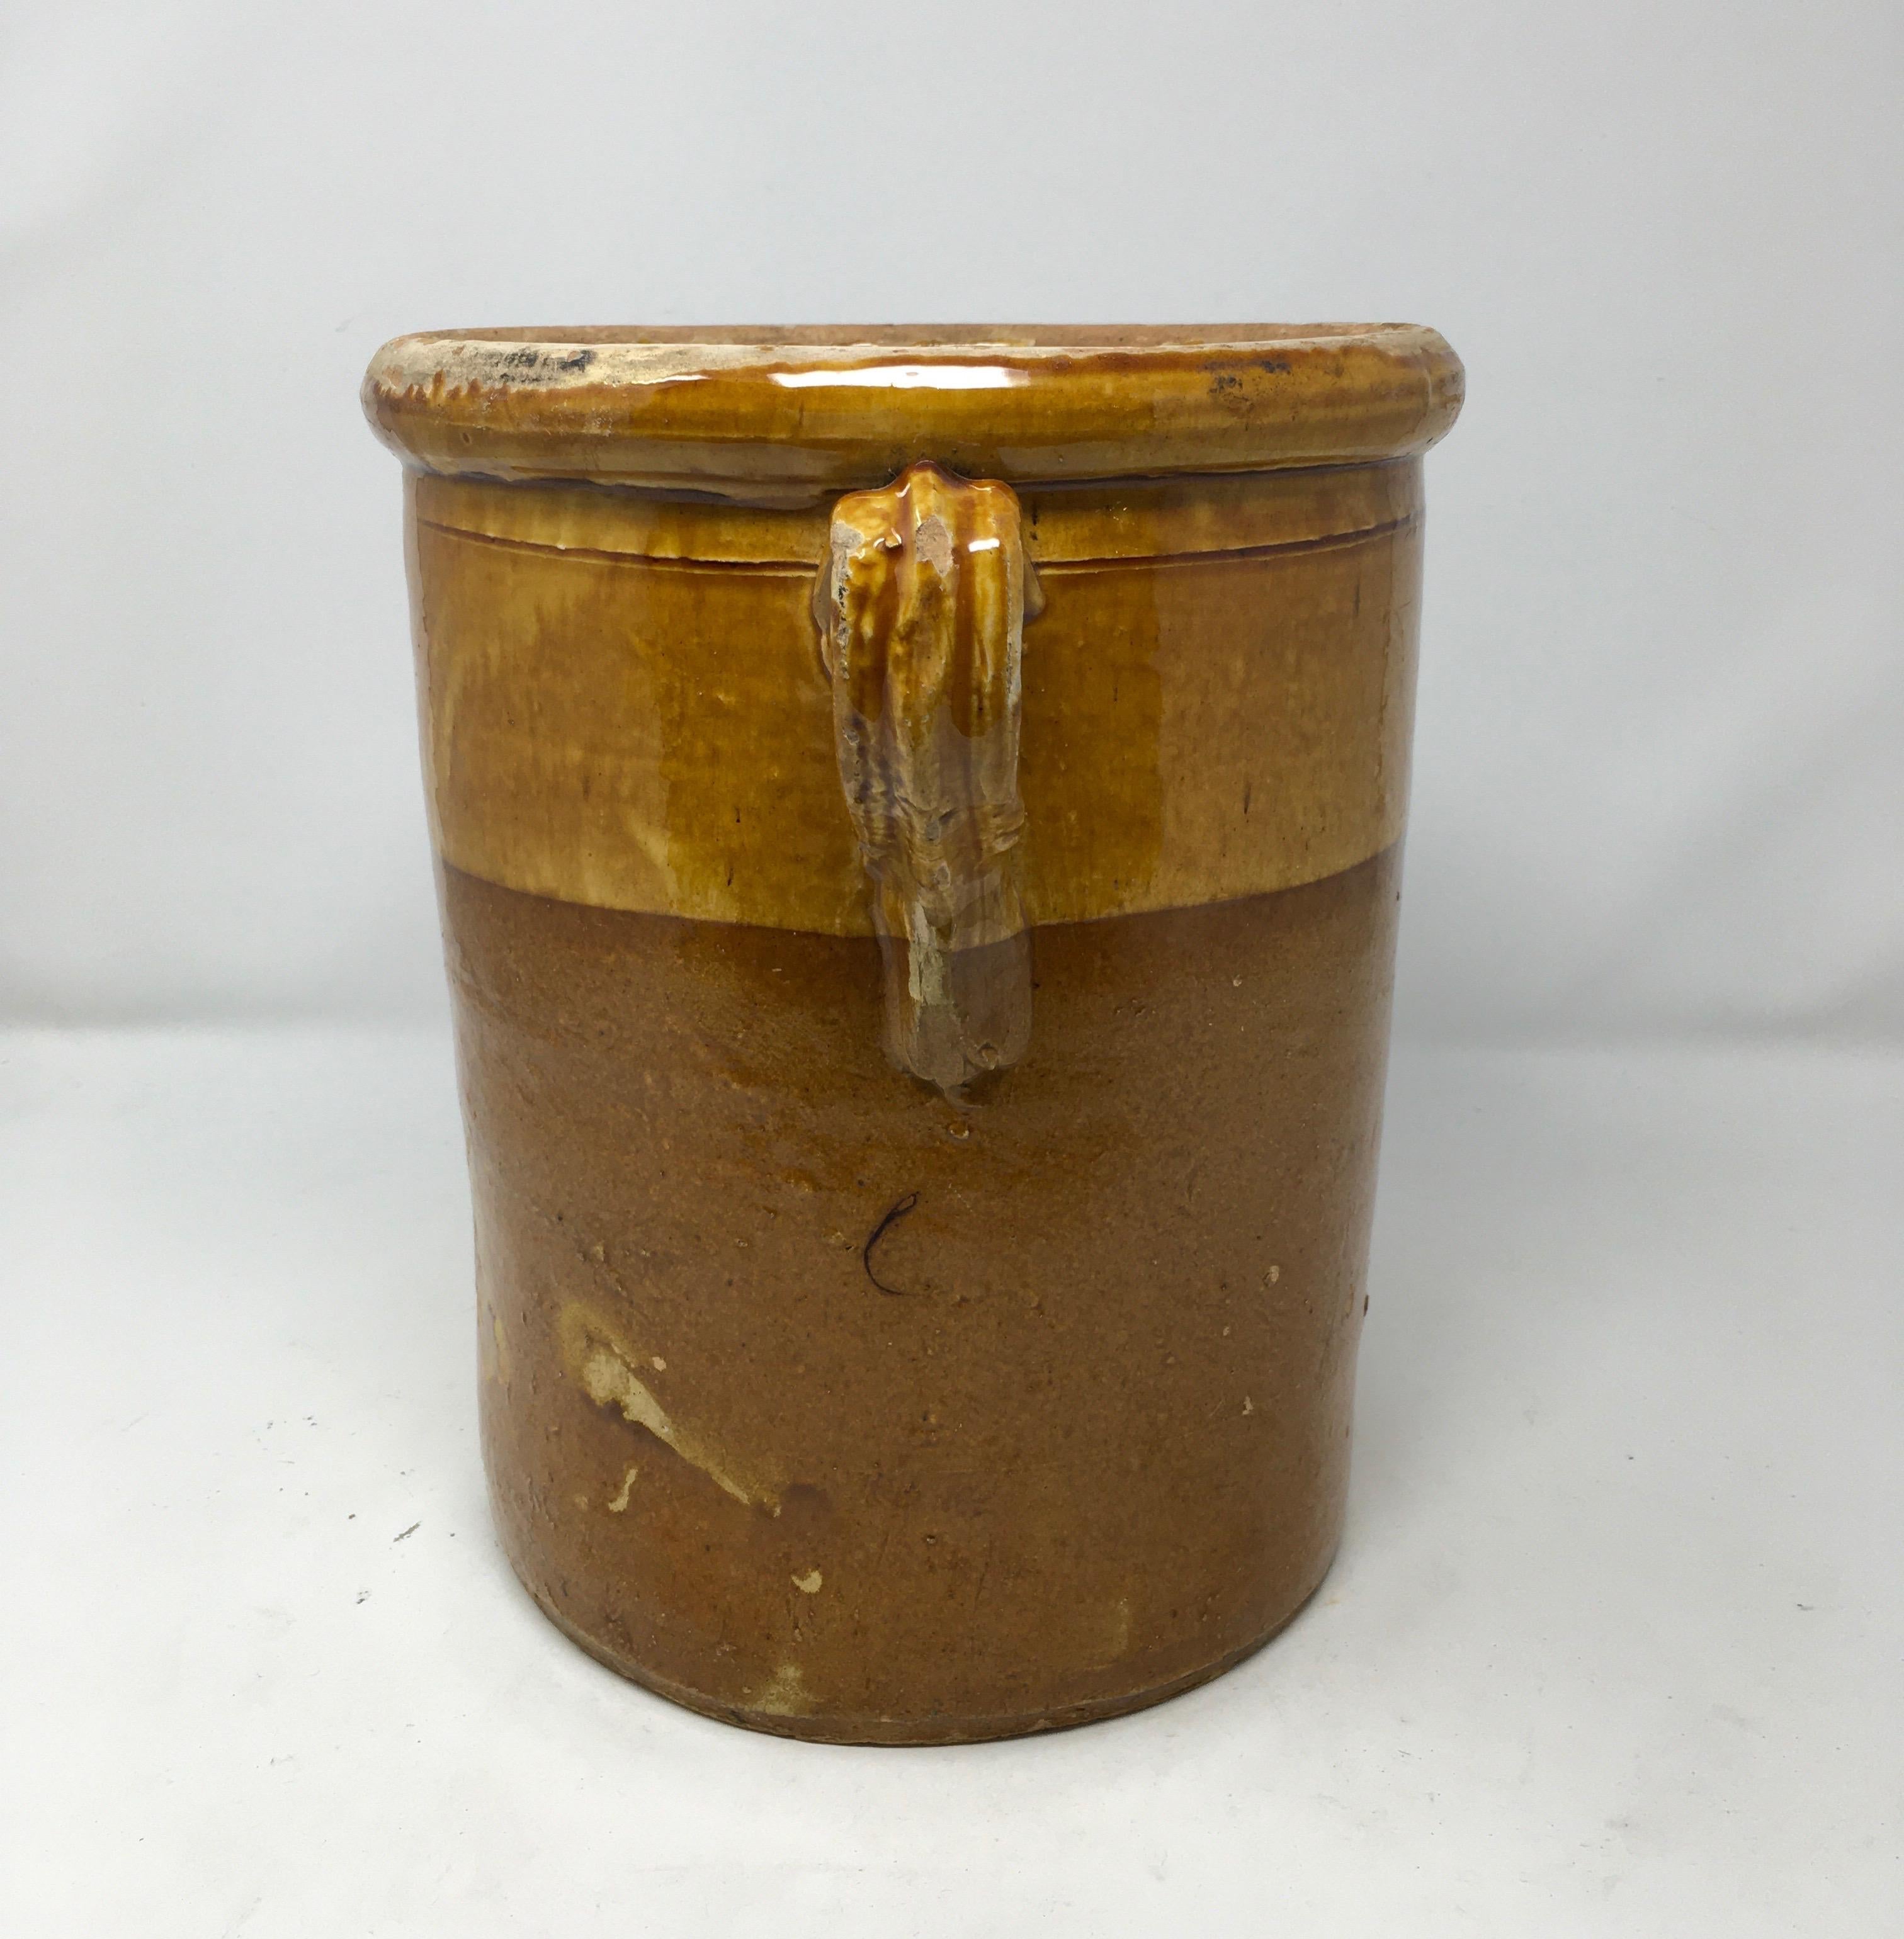 We found this glazed earthenware crock in Southern France. The top half of this large stoneware crock has a shiny mustard yellow colored glaze with a brown glaze on the lower portion. This piece is in good condition with some minor ware around the